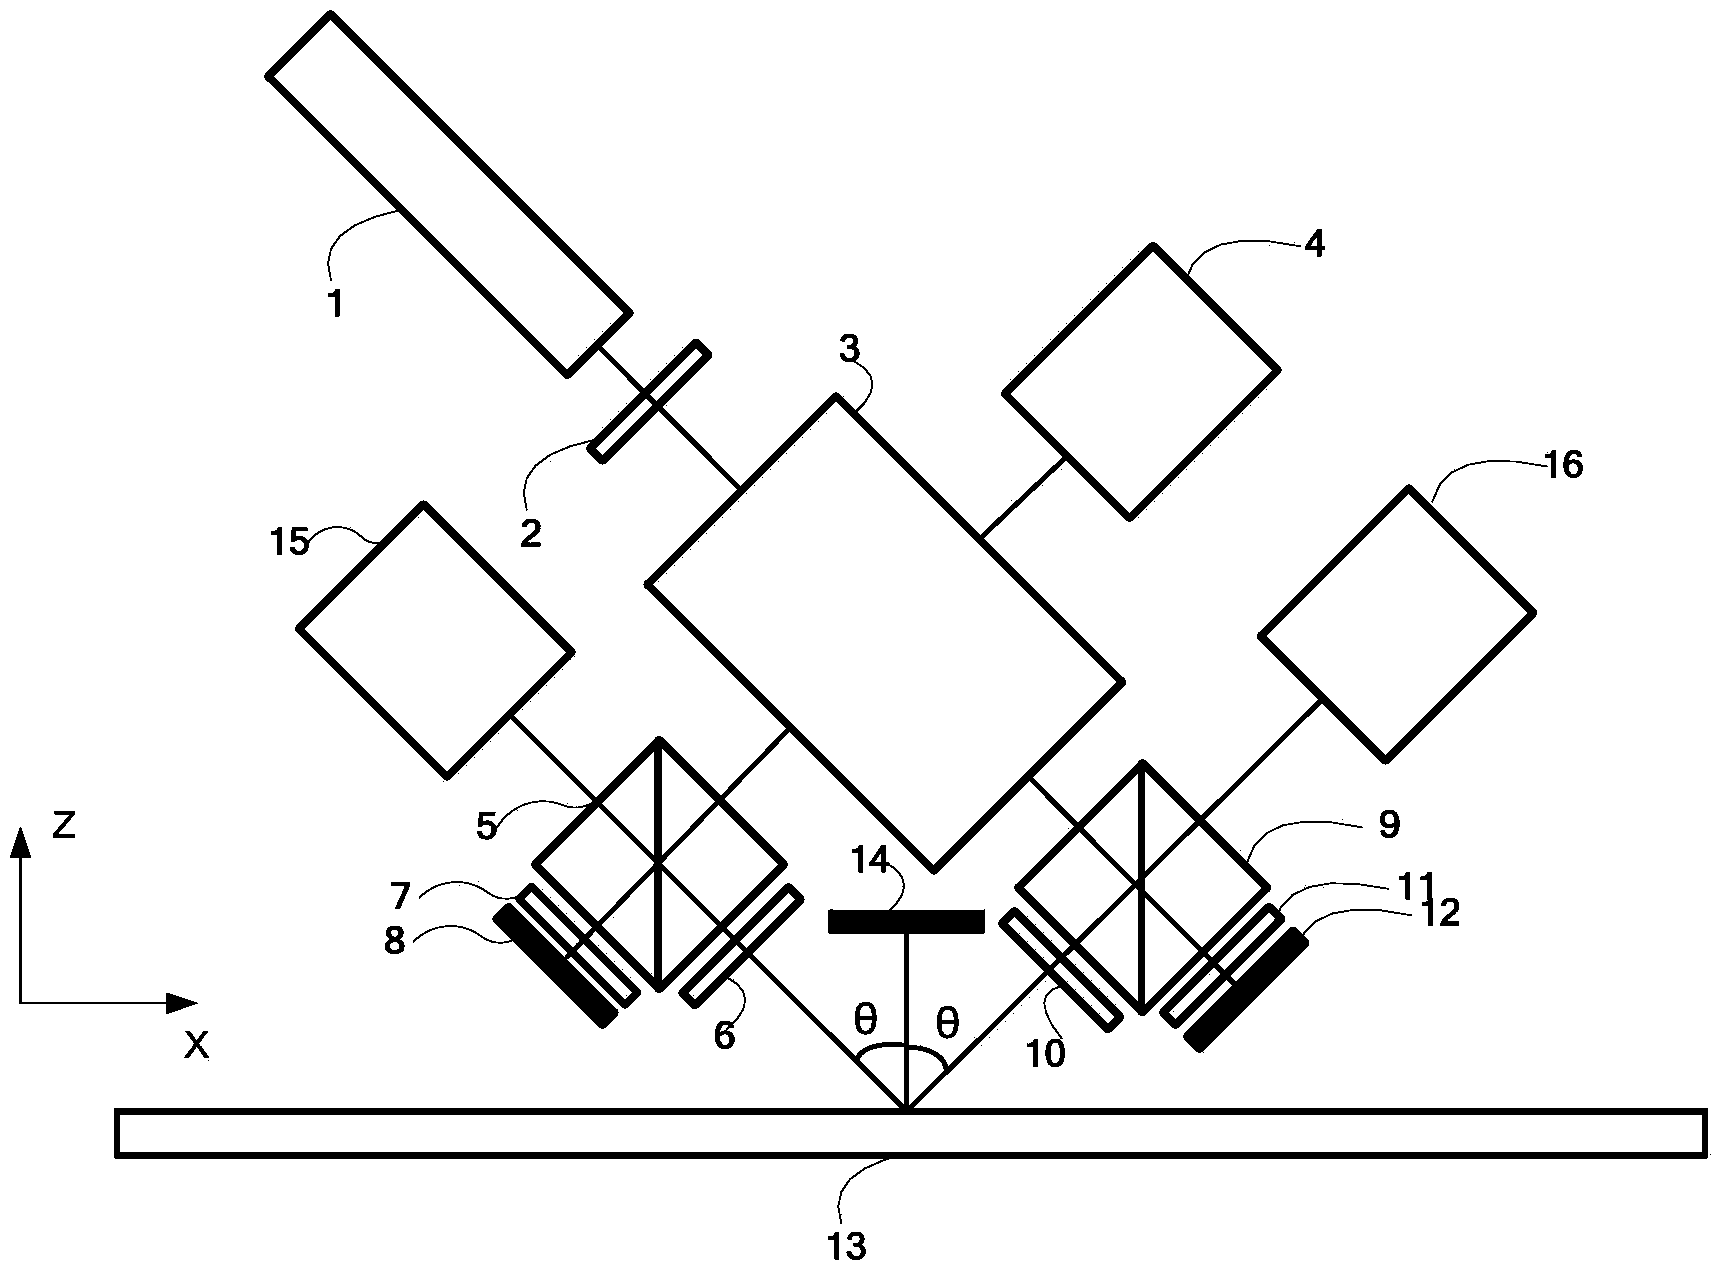 Symmetric-type grating heterodyne interference secondary diffraction measuring device